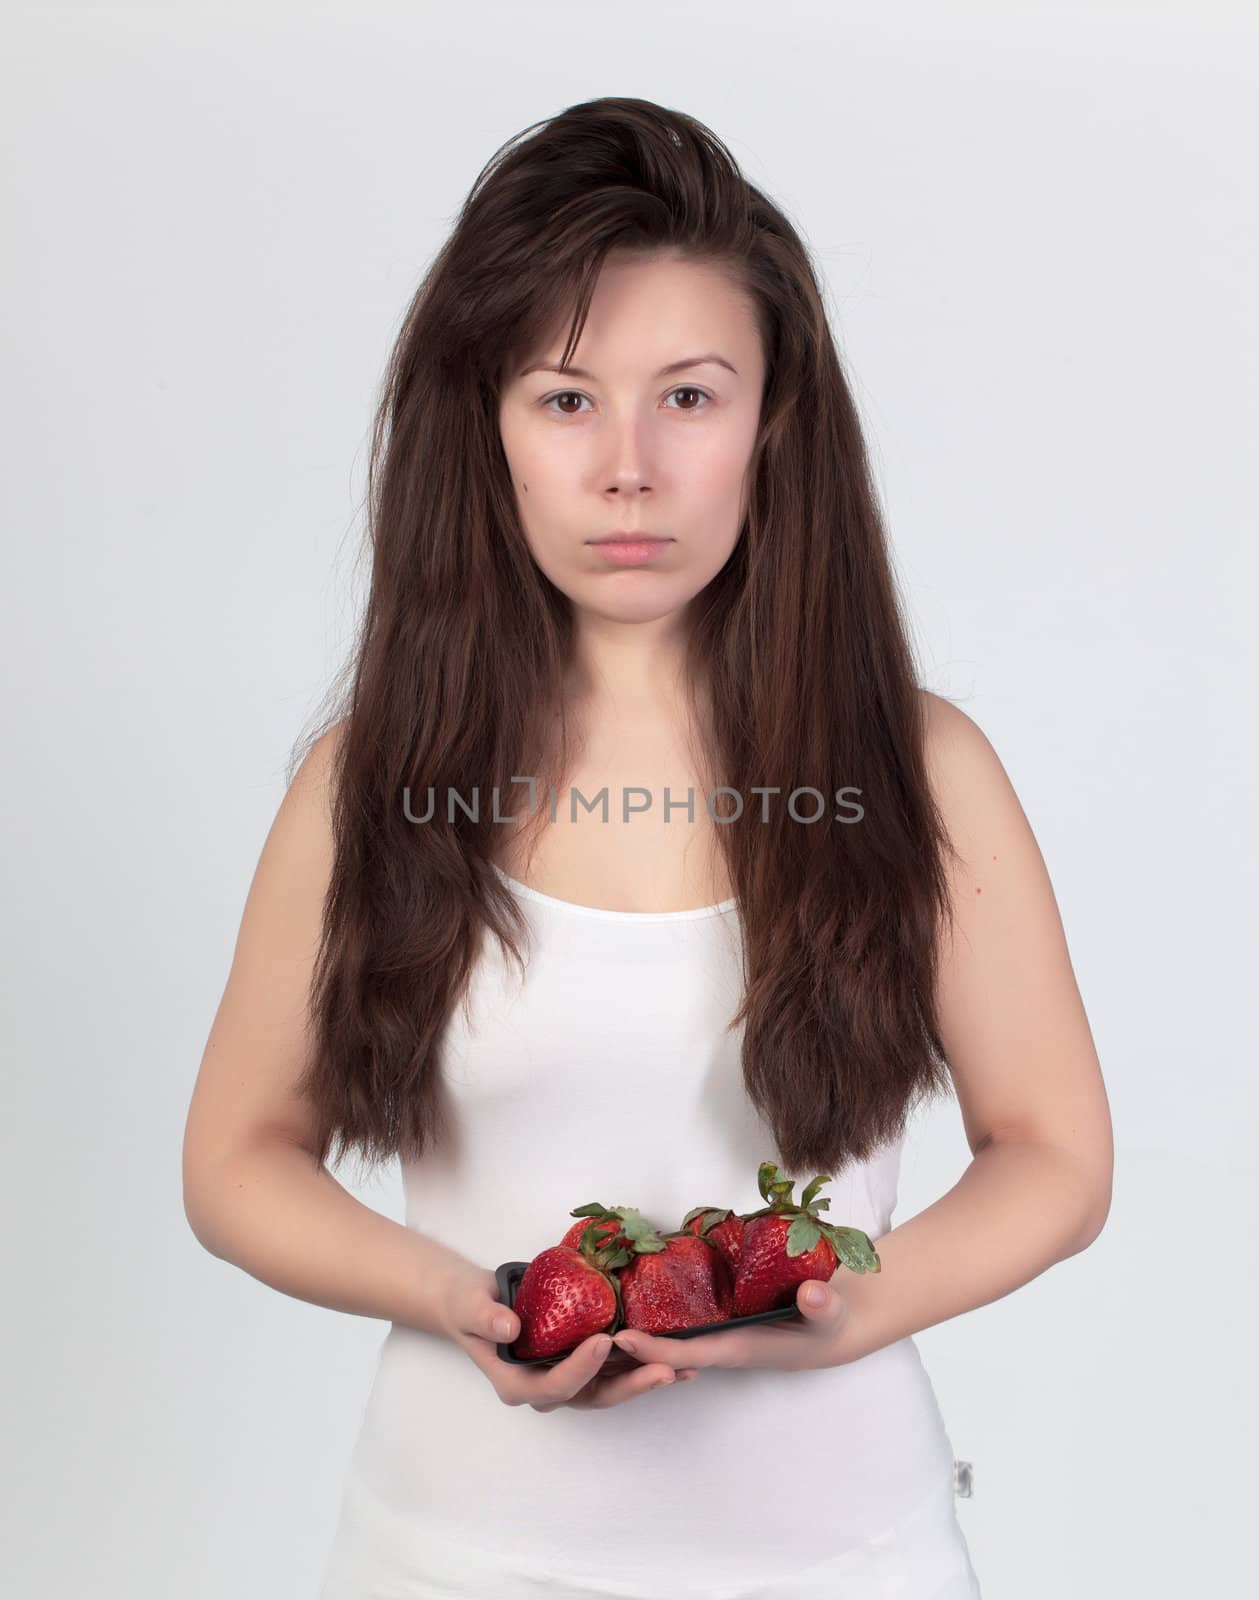 The young beautiful woman with the fresh strawberries, the concept of healthy food